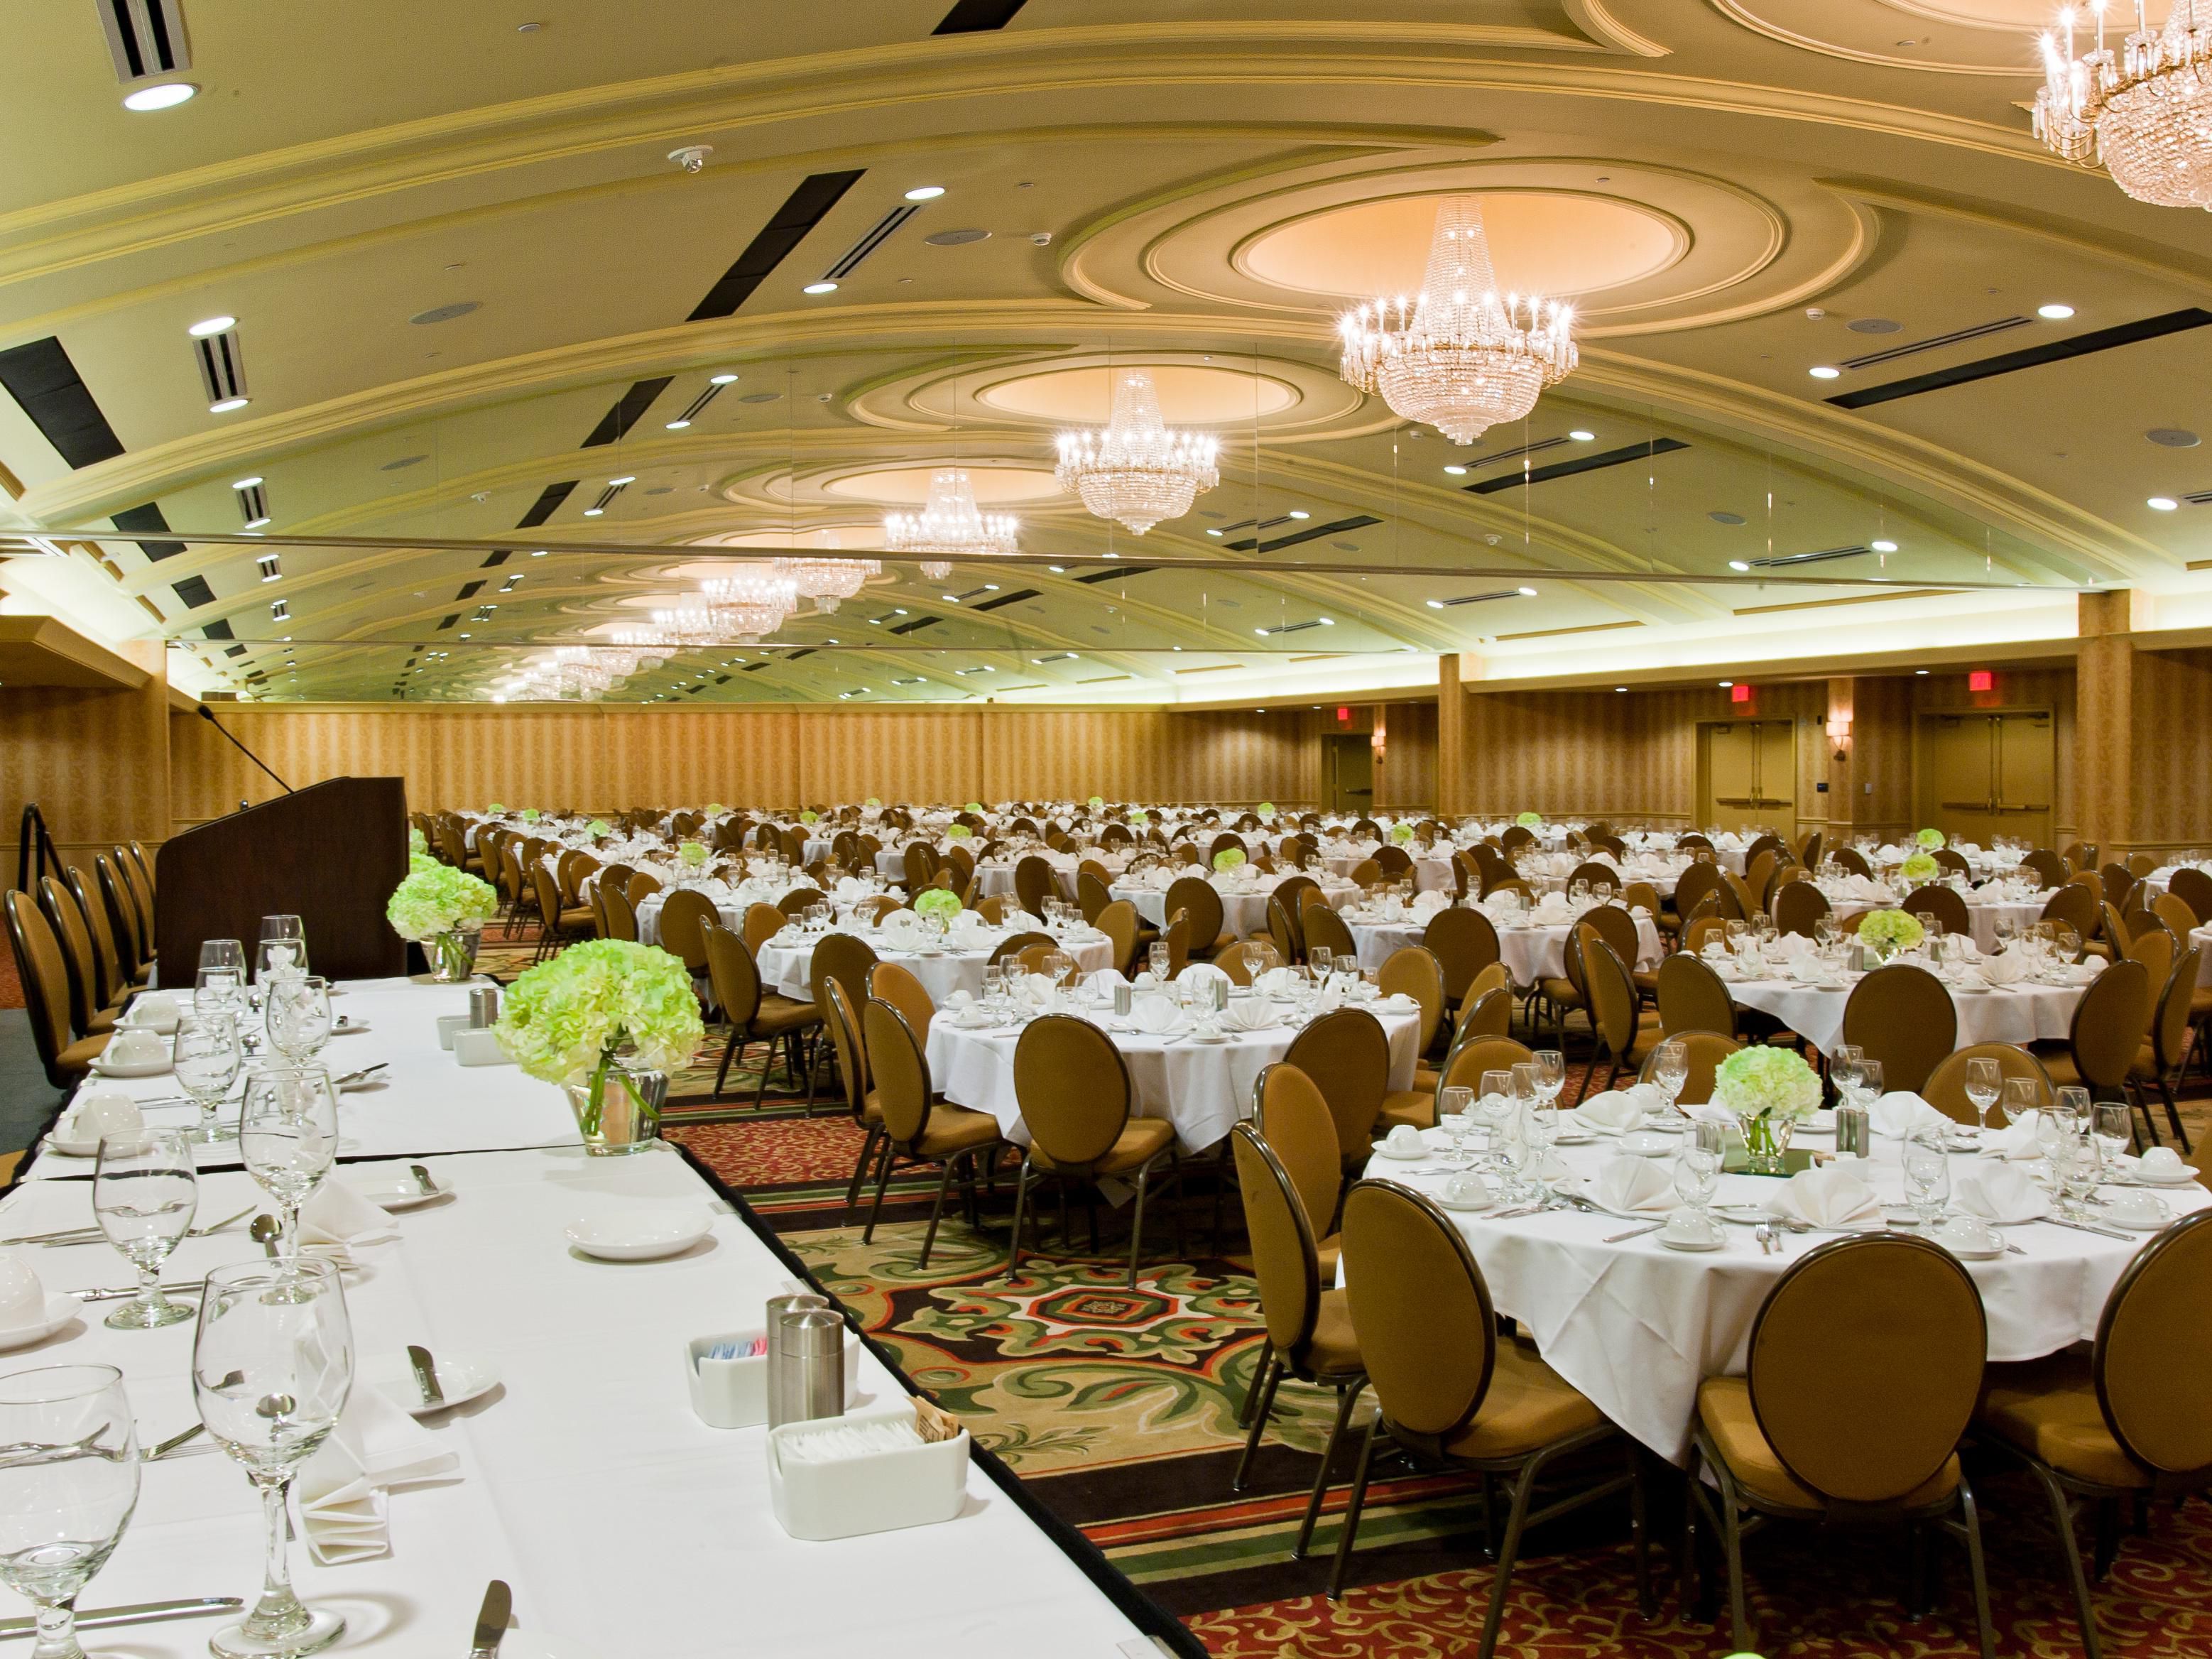 Host your Louisville event in one of our versatile venues. Boasting nearly 50,000 square feet of Louisville event space, including 24 meeting and banquet rooms, an executive boardroom, and an elegant ballroom, we are “The Place to Meet.” Whether it's a business function or a special celebration, we can accommodate groups of up to 1,200 guests.